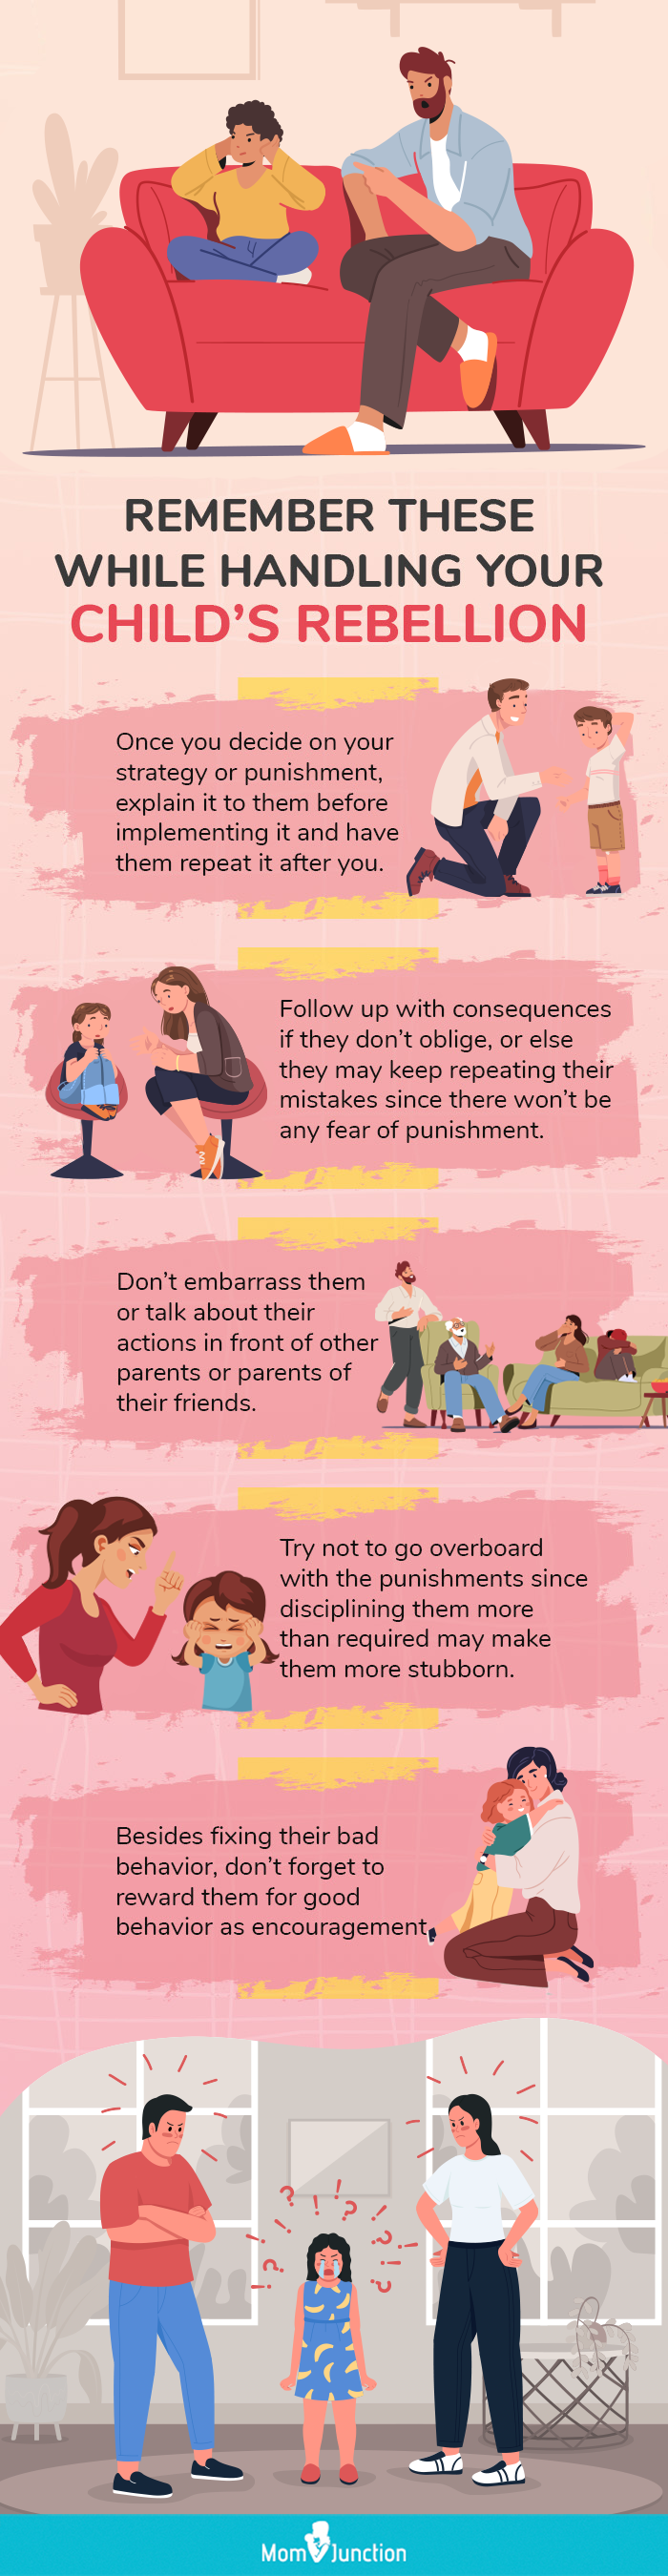 remember these while handling your child’s rebellion (infographic)